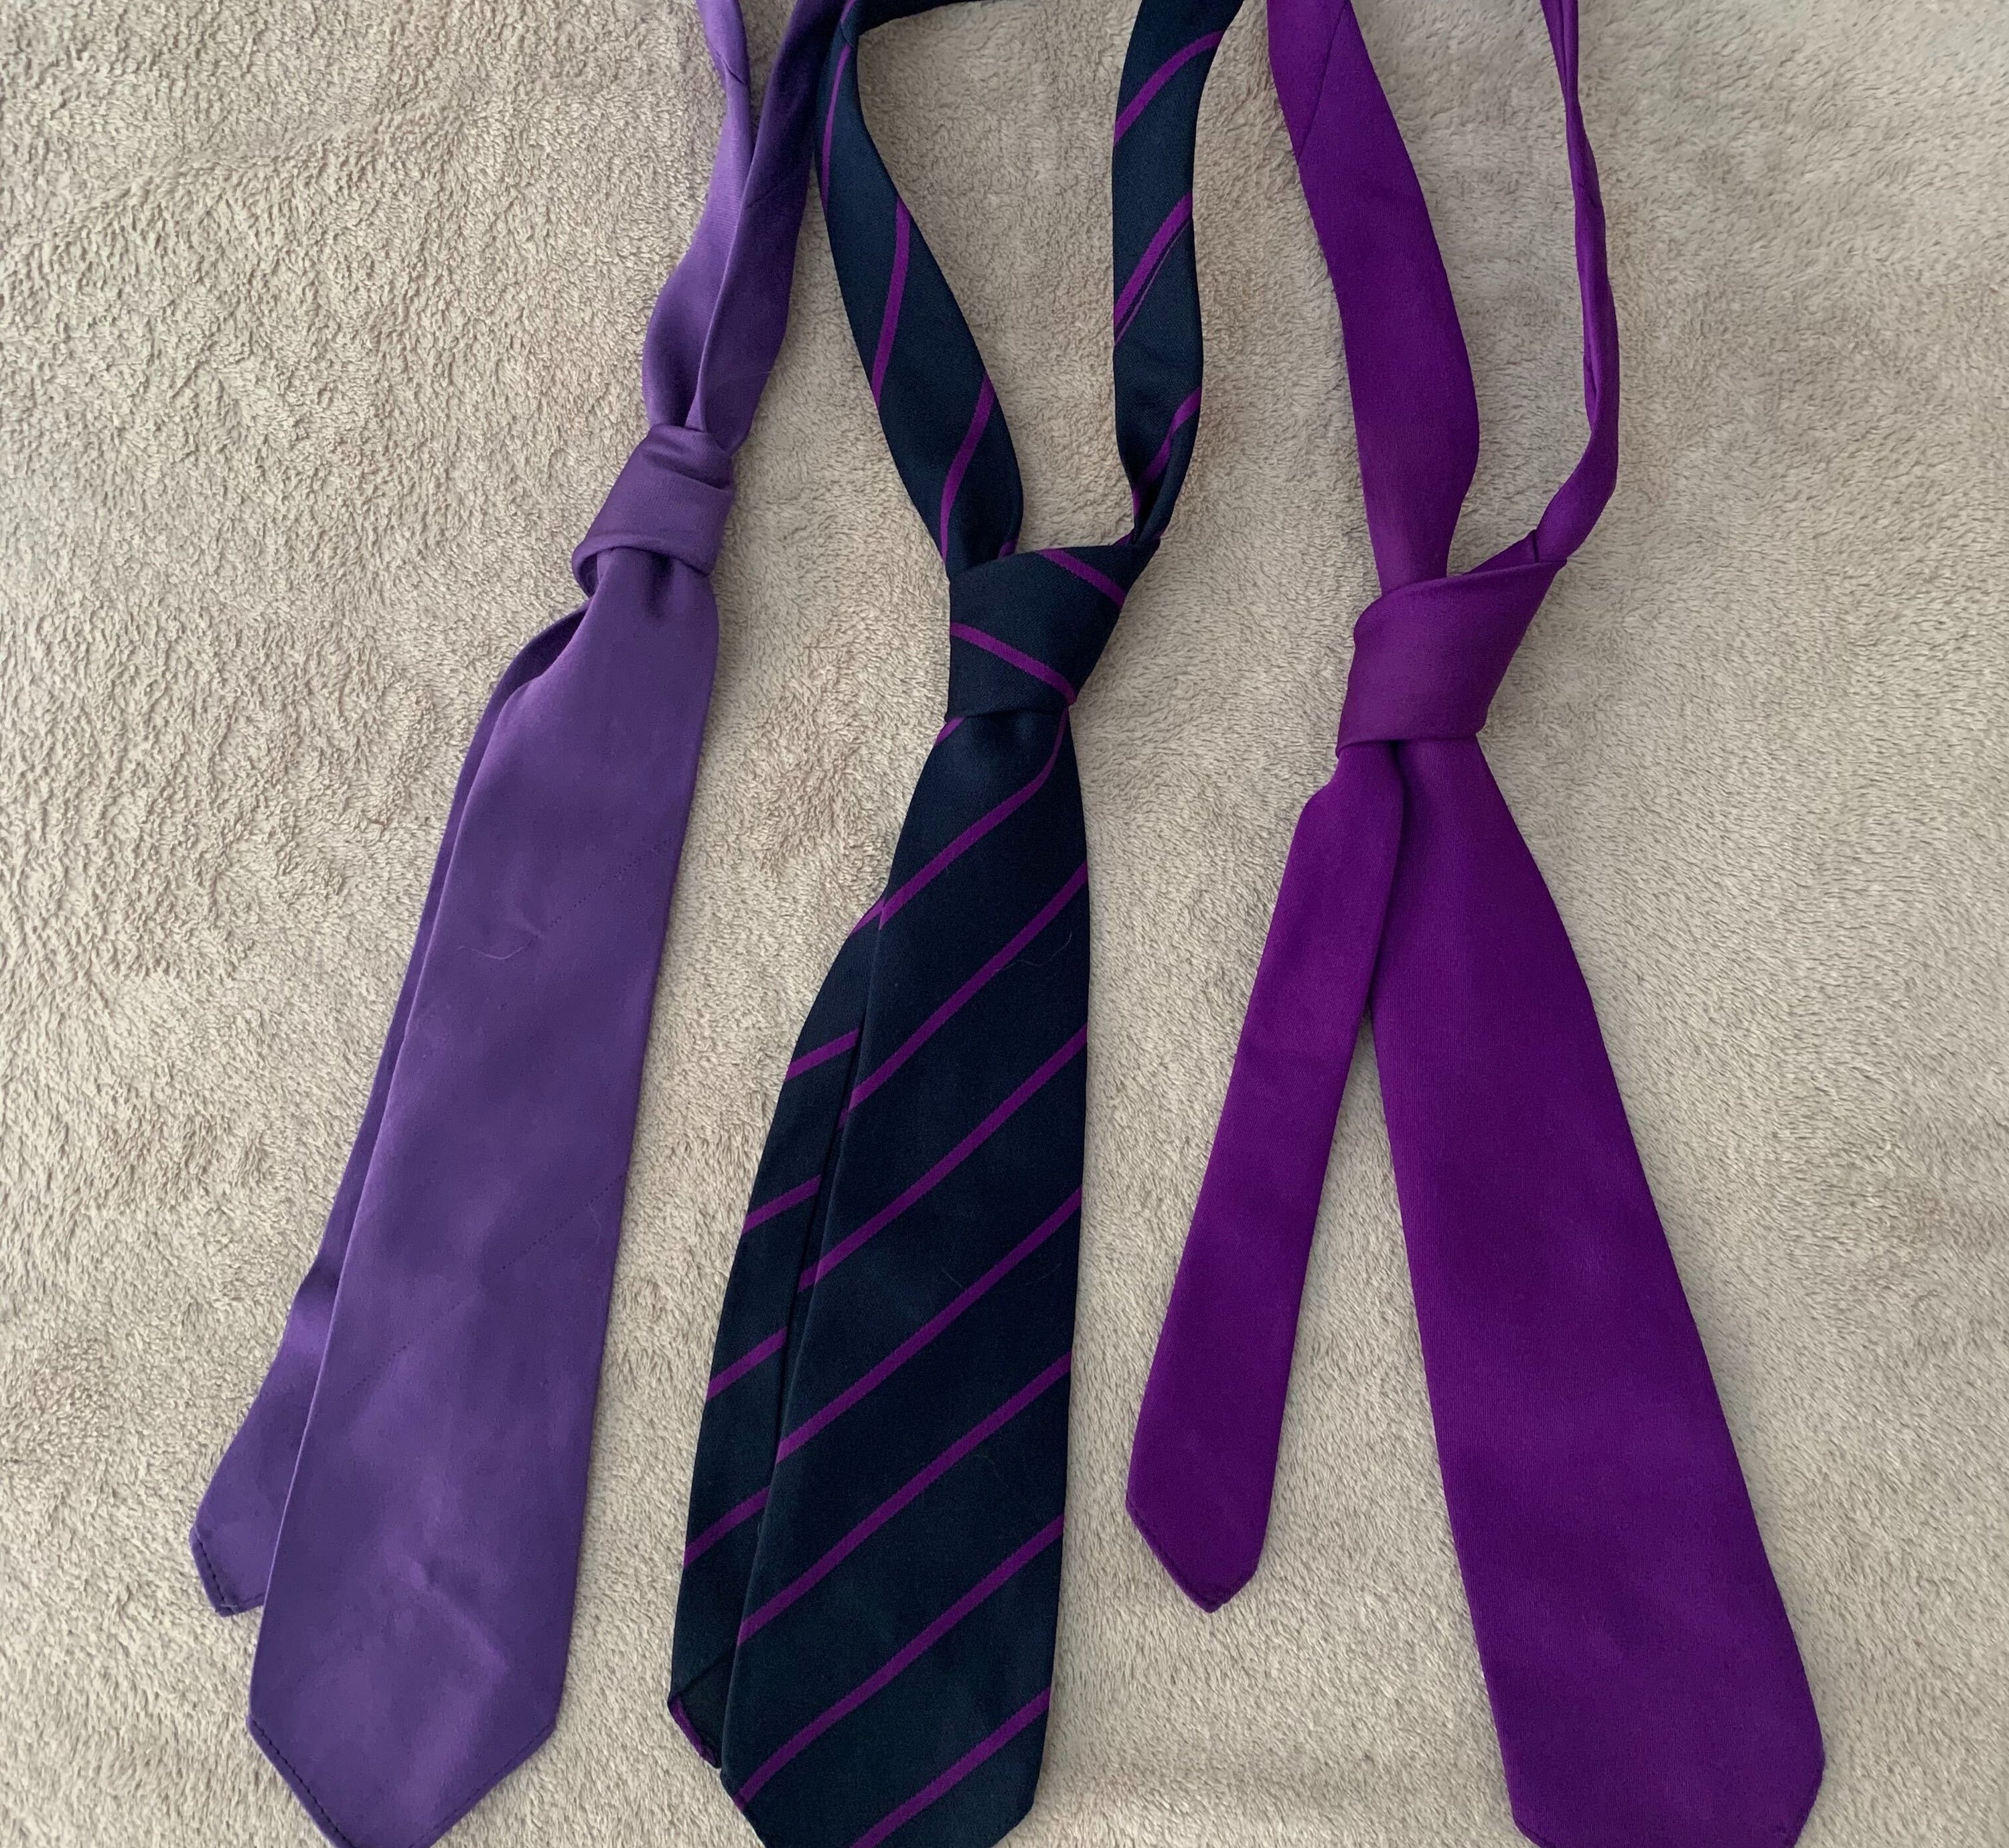 3 purple neck ties laid out